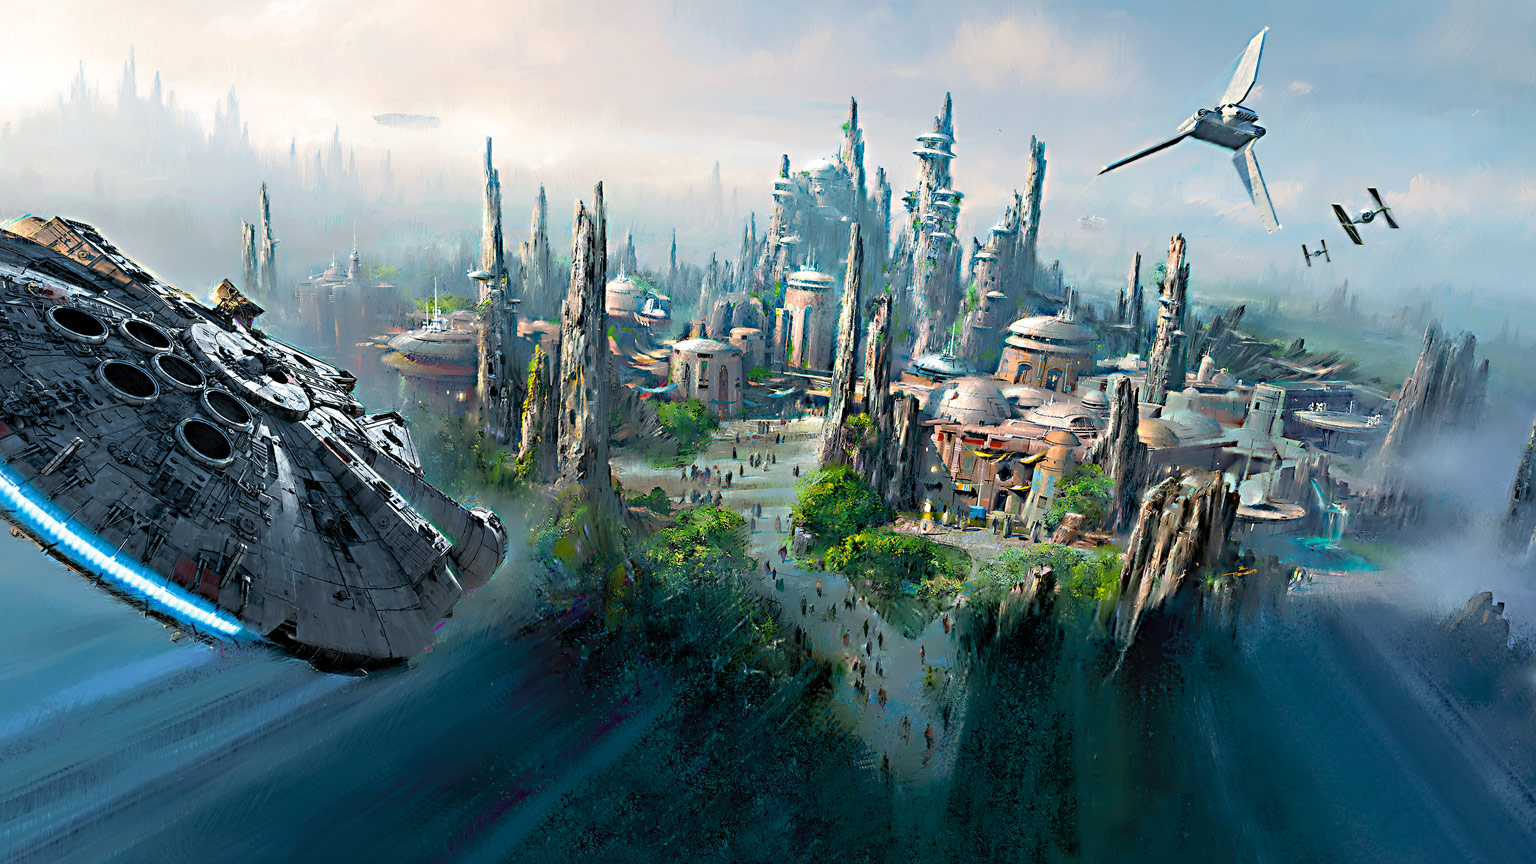 Bright Suns: Inside The Art of Star Wars: Galaxy’s Edge – Exclusive Preview